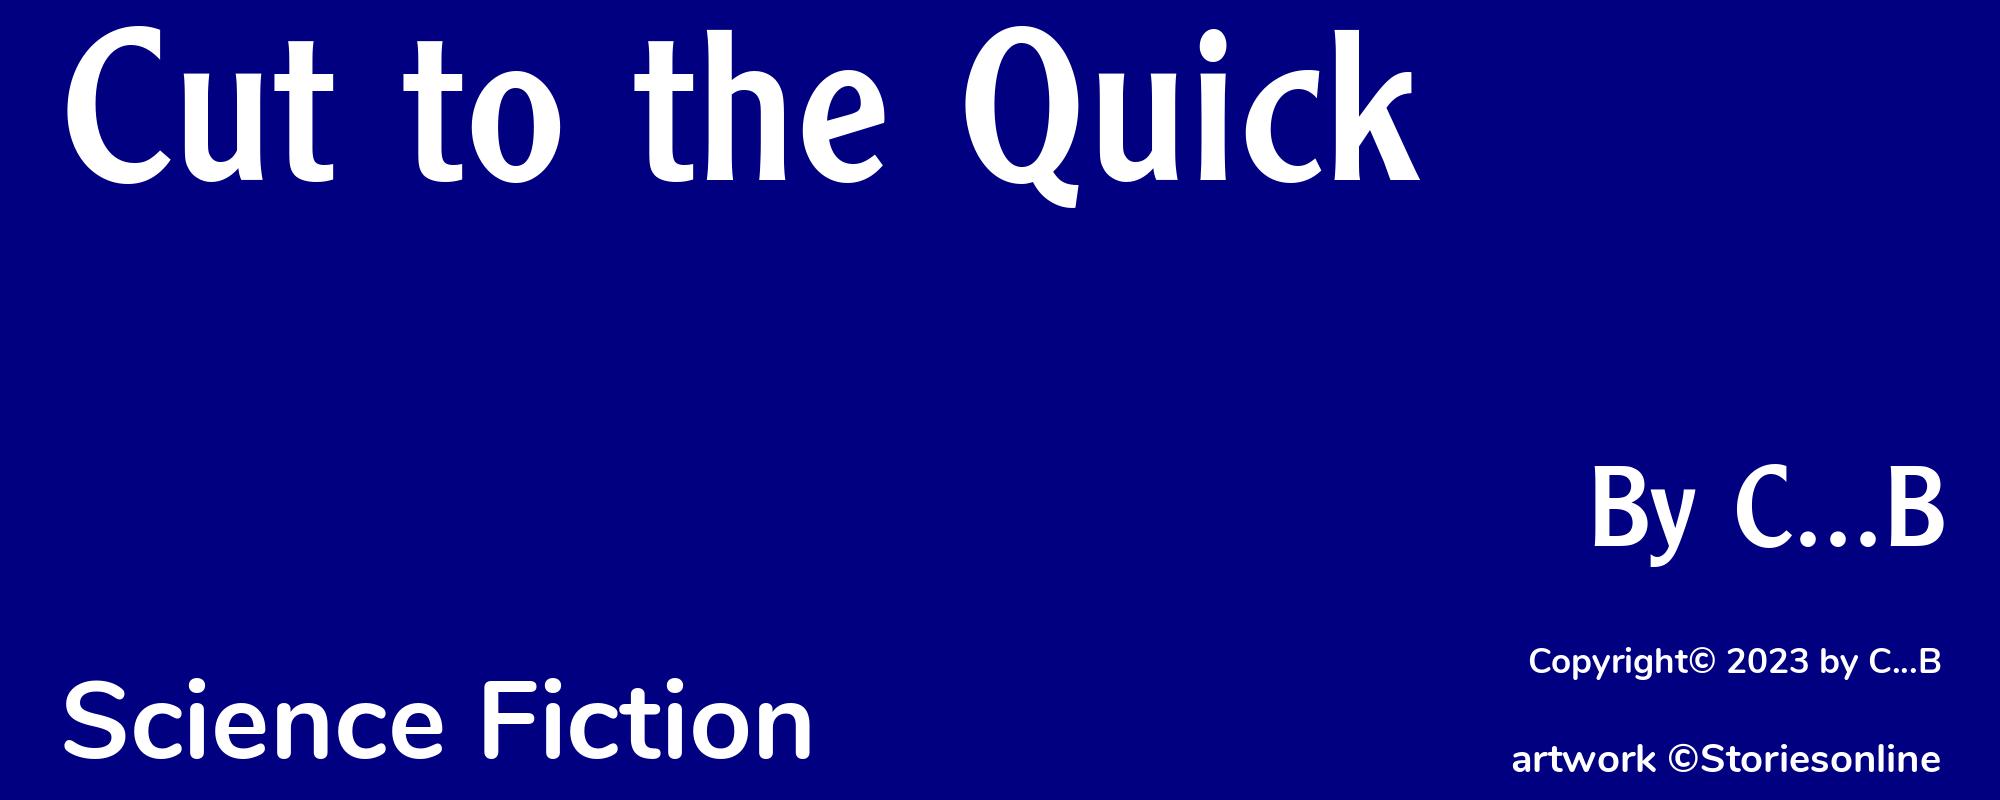 Cut to the Quick - Cover